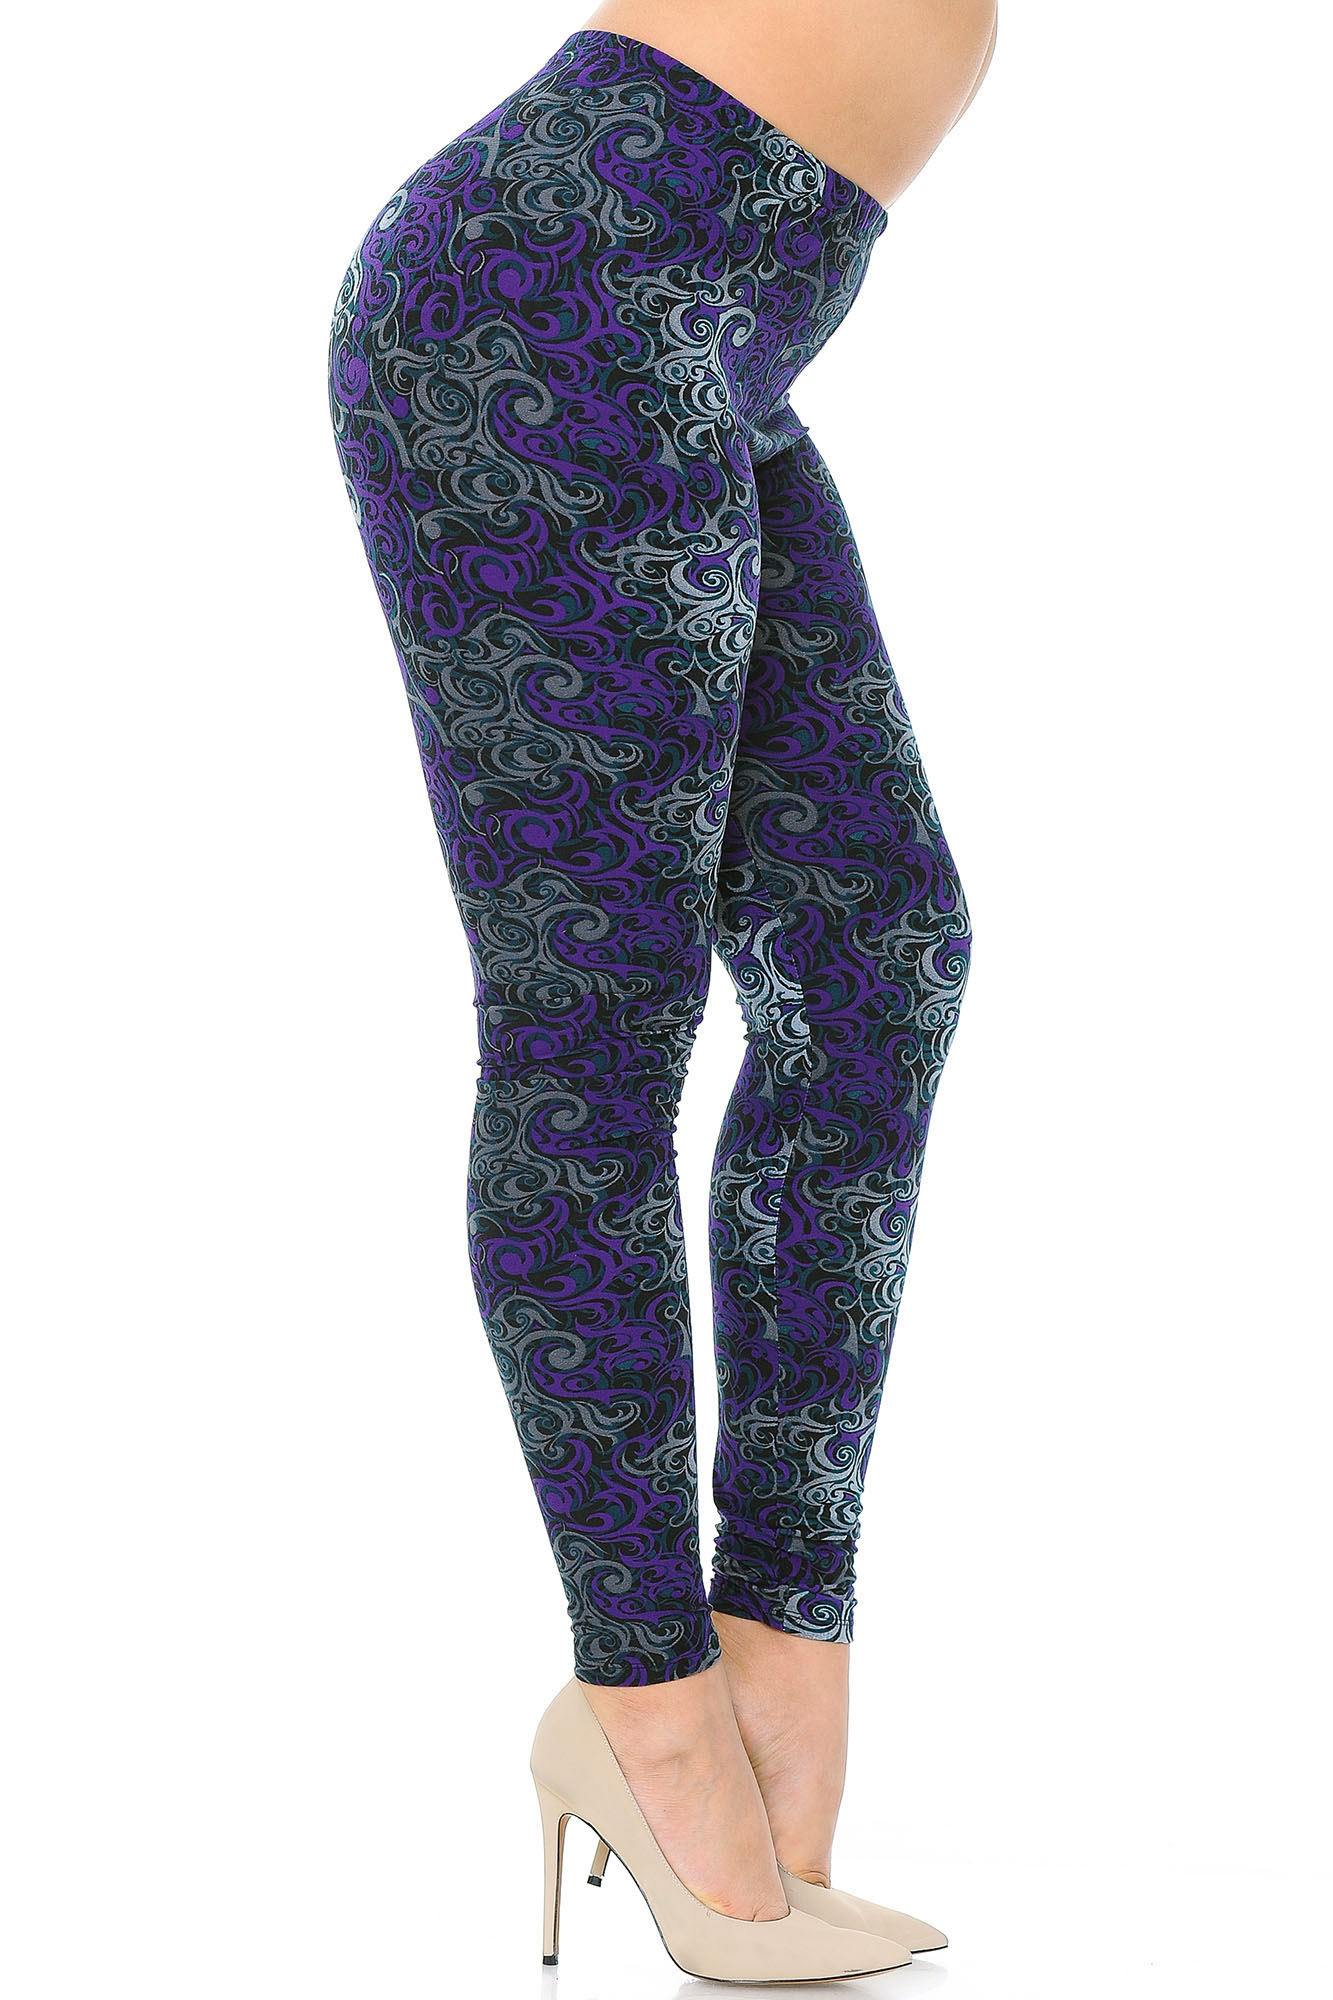 Wholesale Buttery Smooth Purple Tangled Swirl Extra Plus Size Leggings - 3X-5X